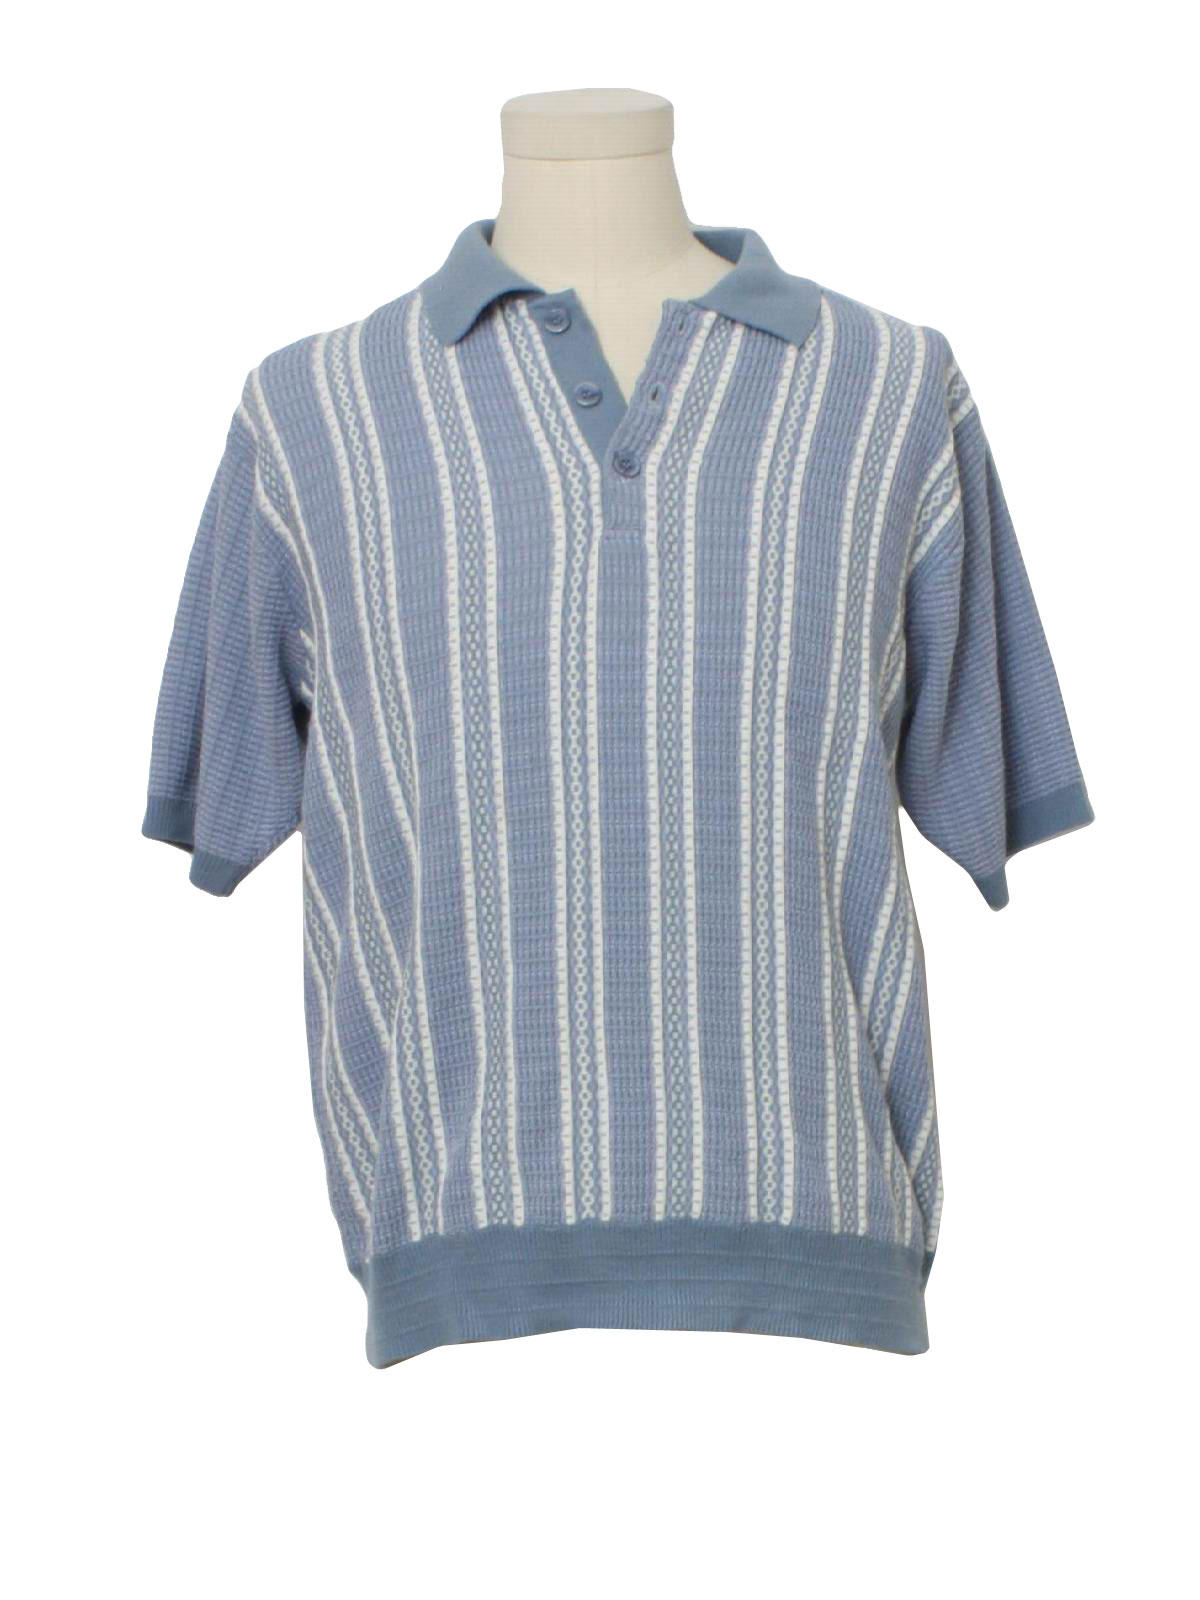 Retro 1980s Knit Shirt: 80s -Apparel Zone- Mens periwinkle background ...